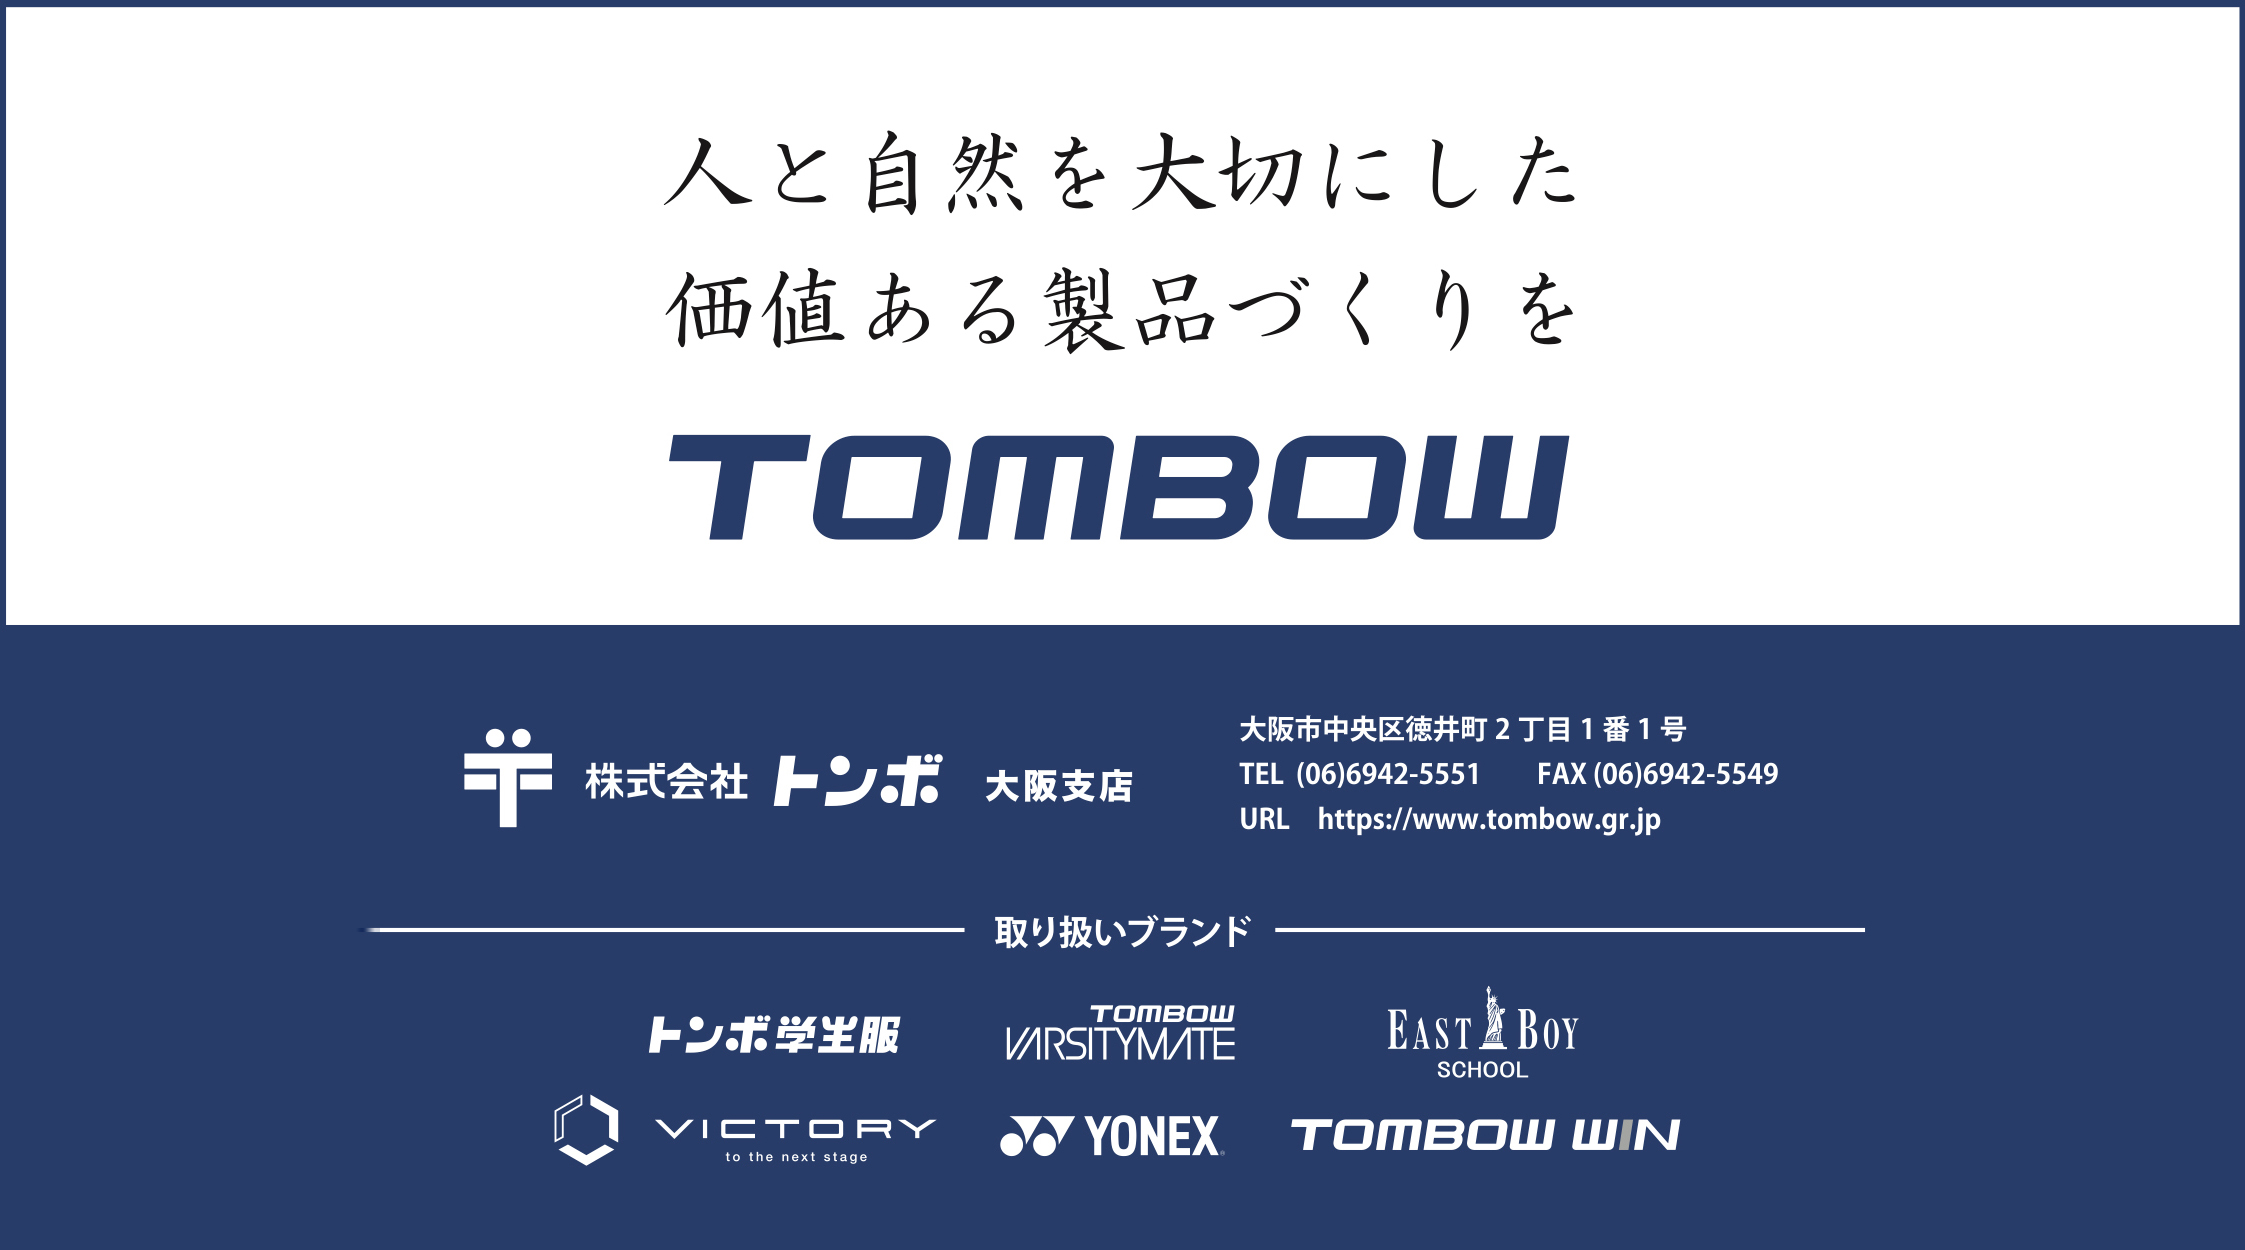 More about tombow